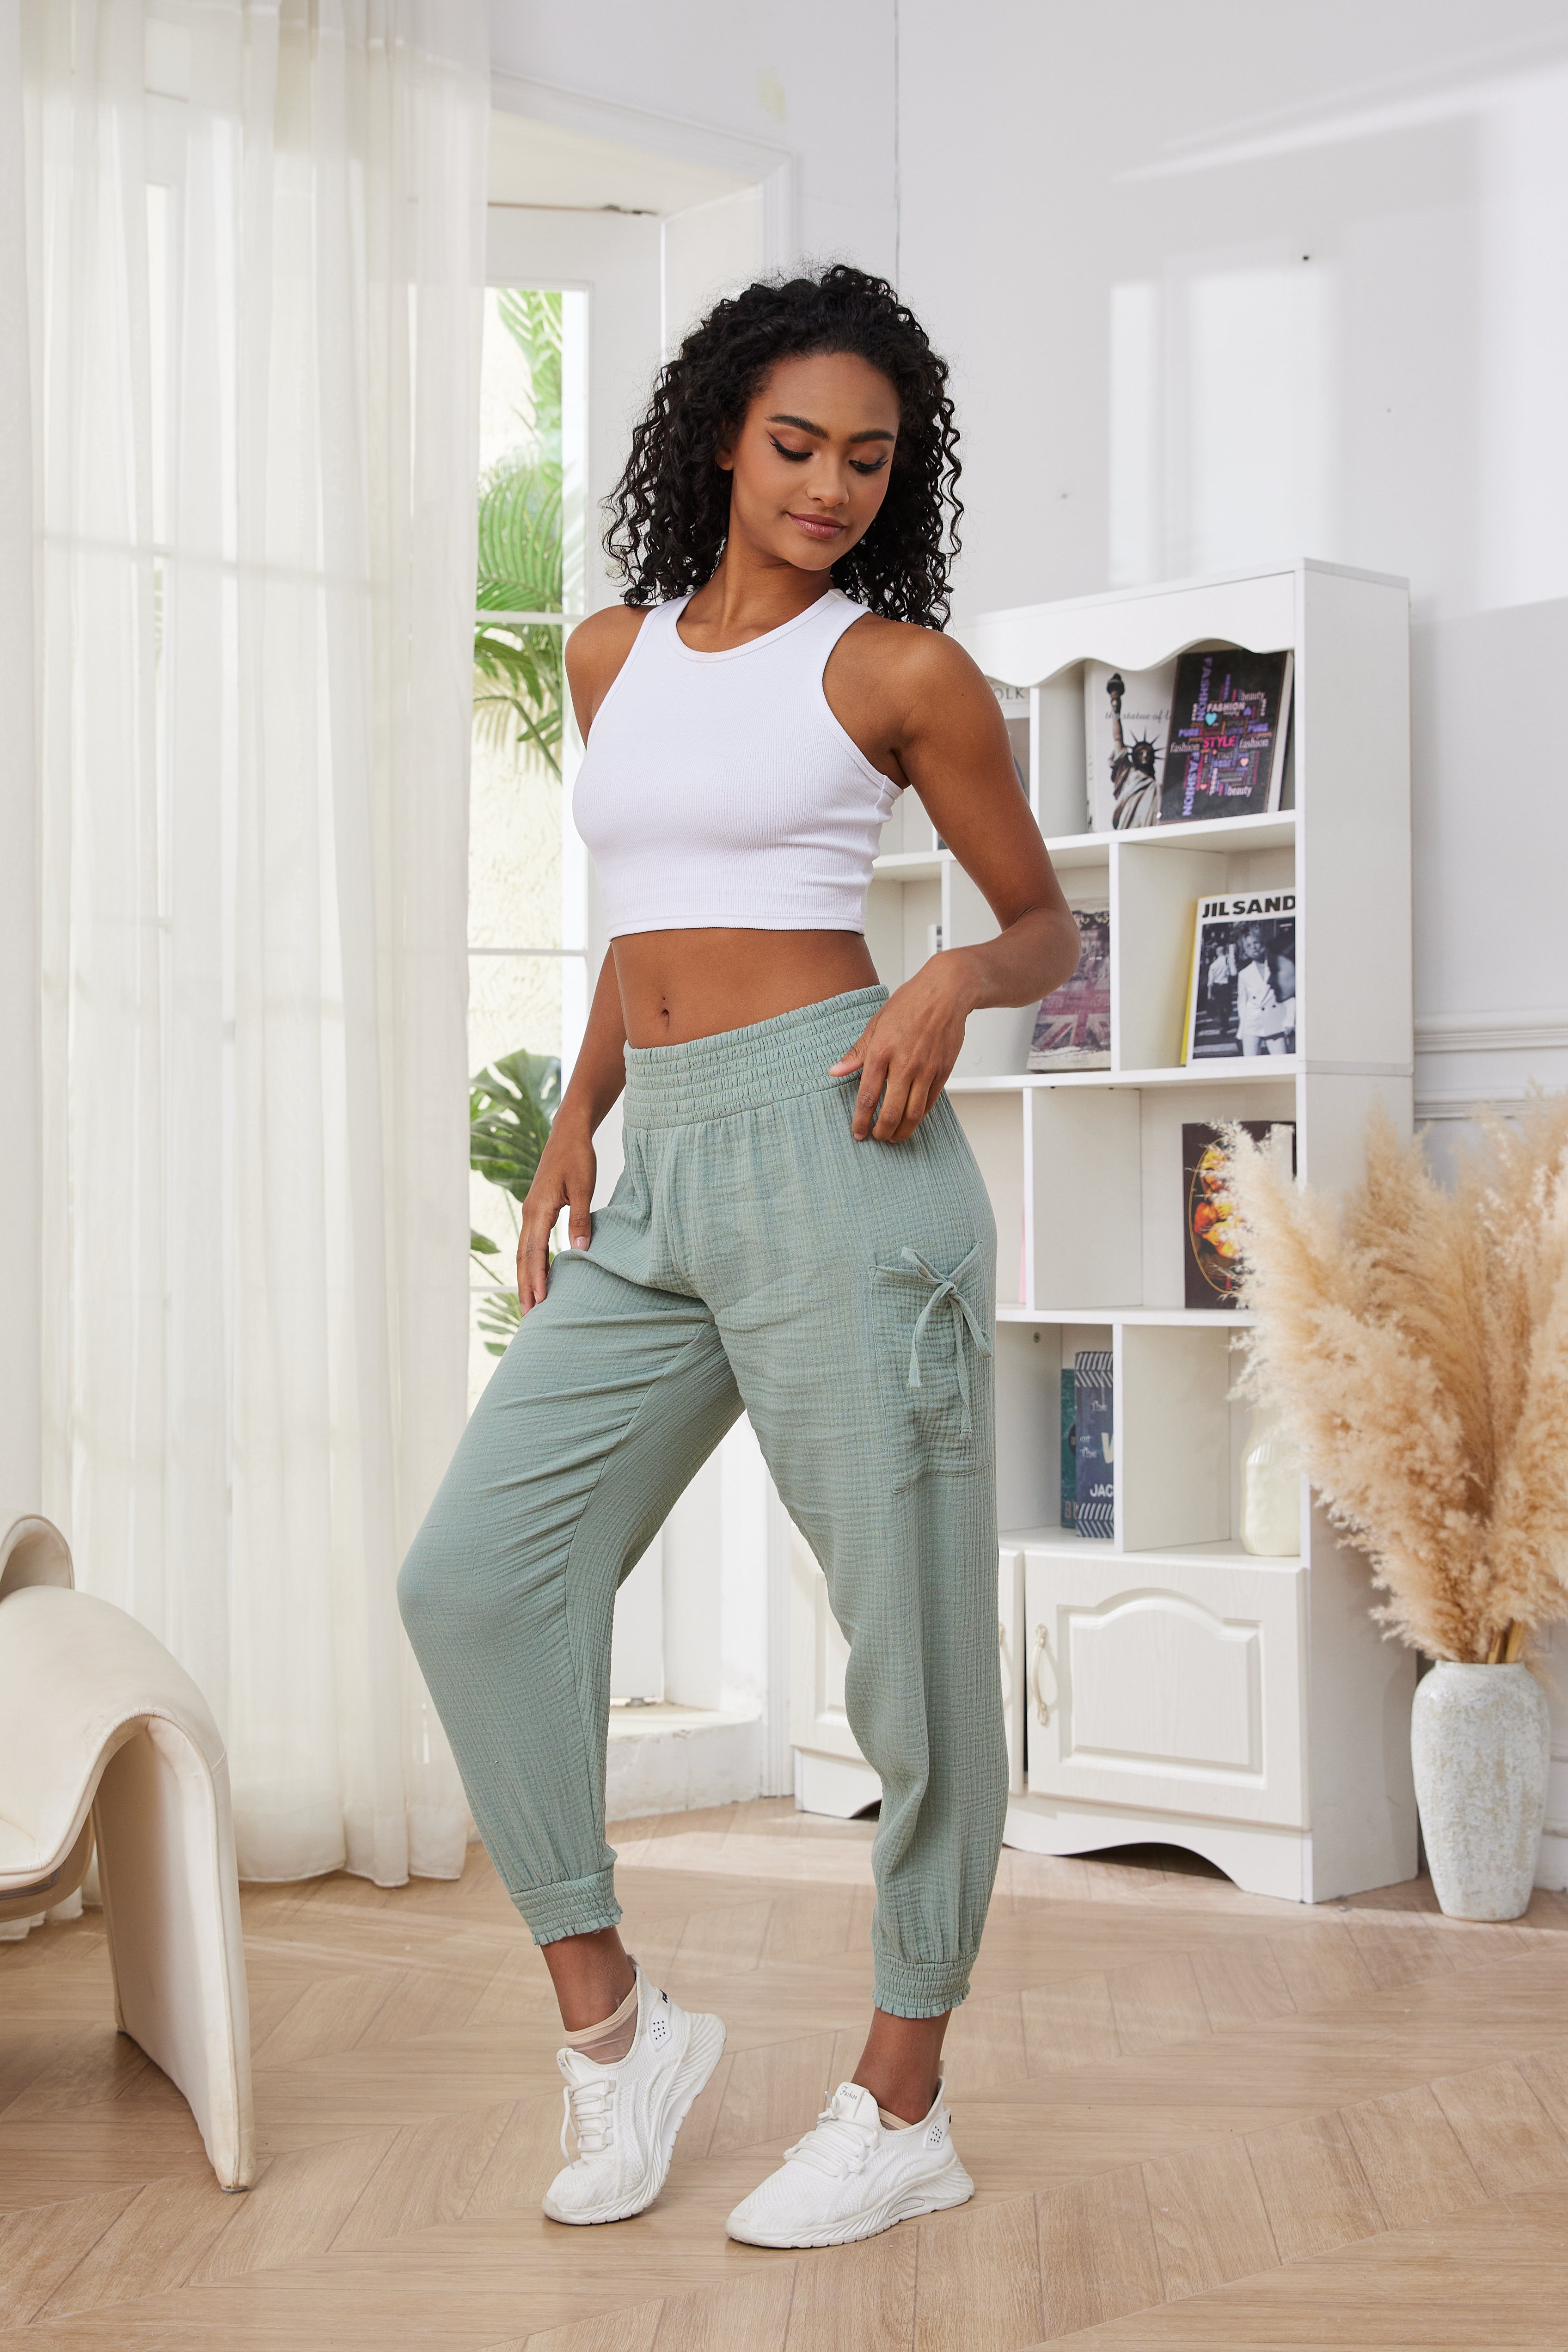 Relaxed fit sage cotton pants - your go-to choice for laid-back chic style